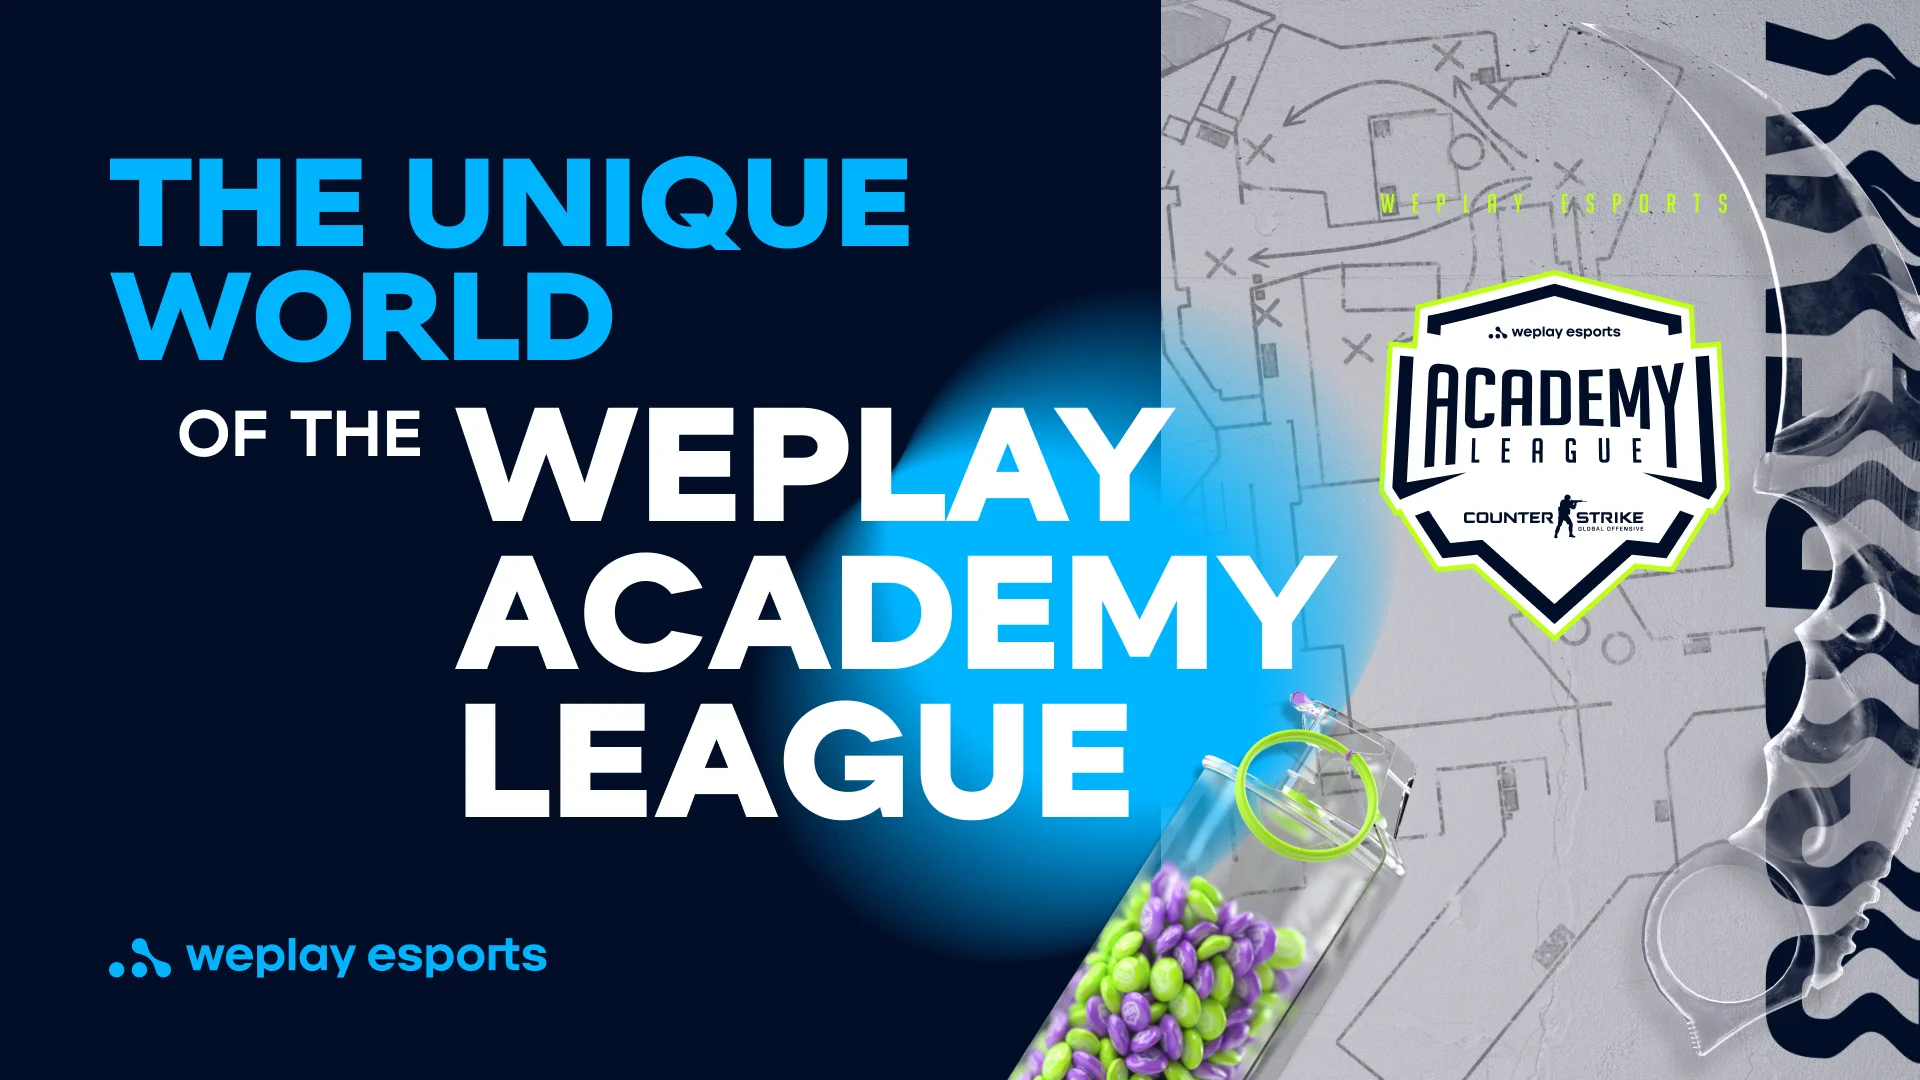 The unique world of the WePlay Academy League. Credit: WePlay Holding